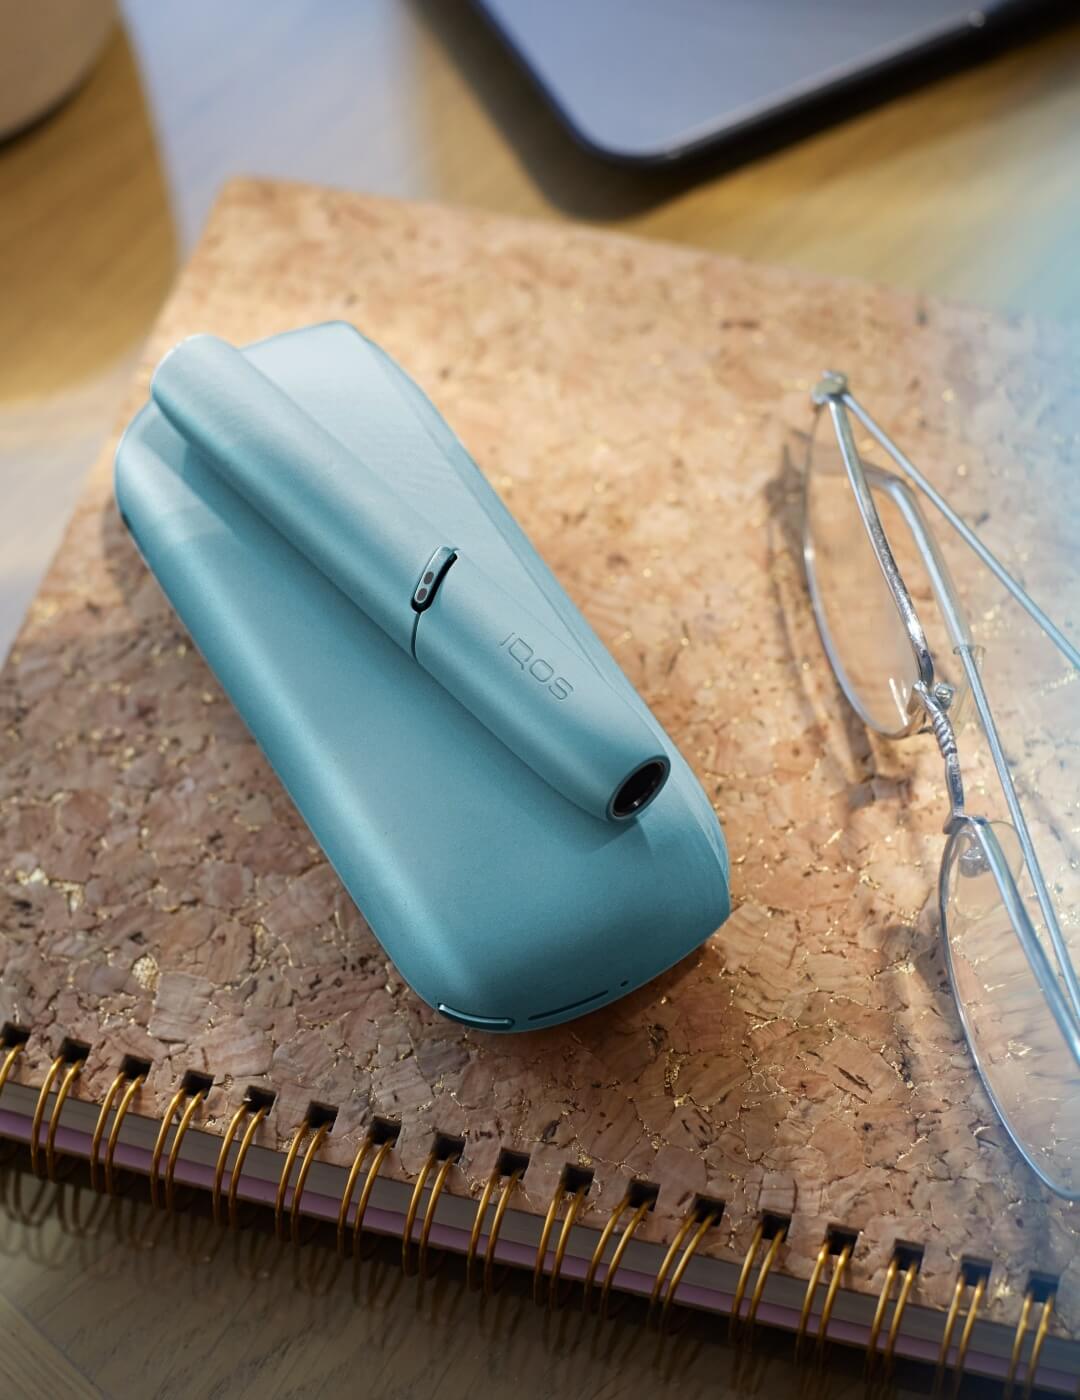 Turquoise device and glasses on a notebook